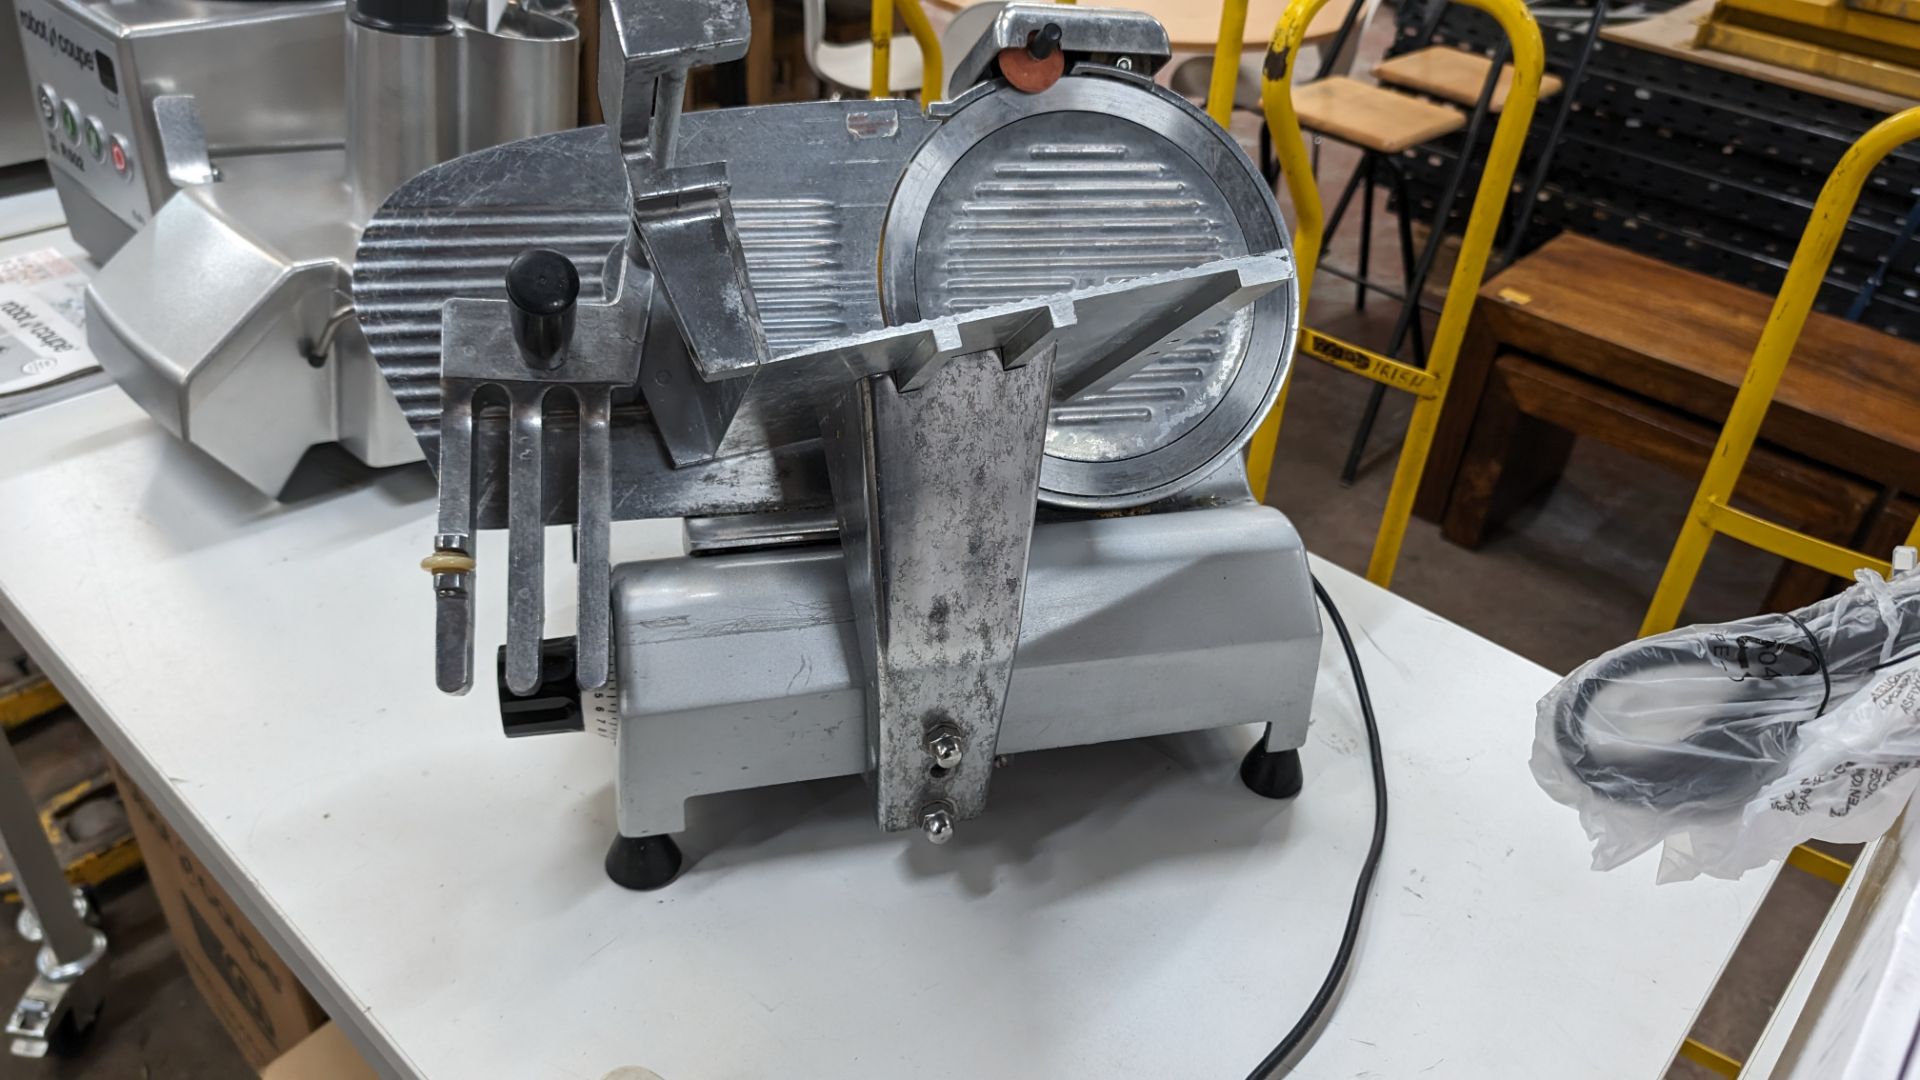 Semi-automatic meat slicer model WED-B250B-2 - Image 8 of 9